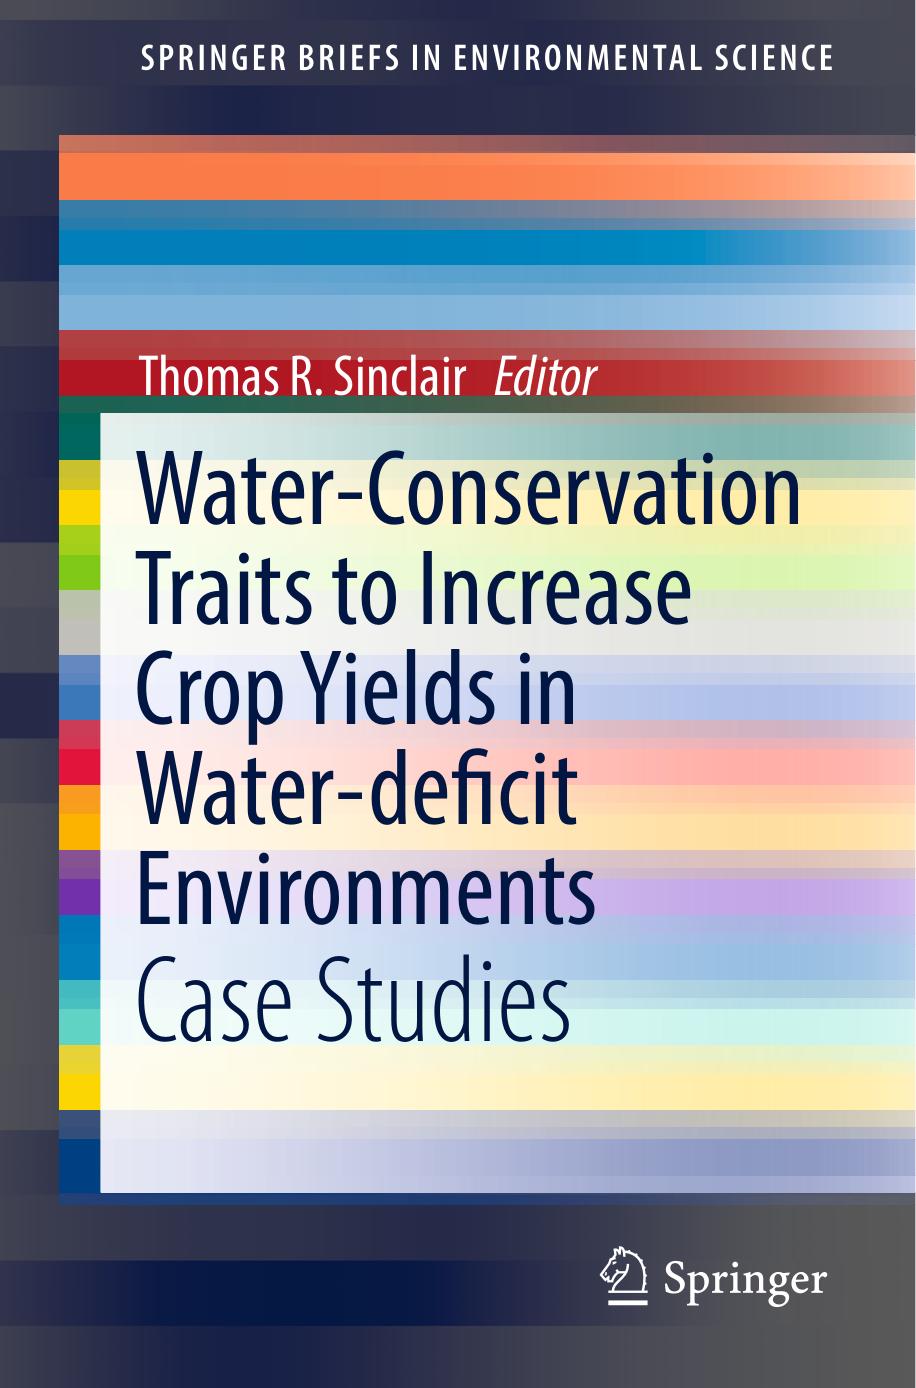 Water-Conservation Traits to Increase Crop Yields in Water-deficit Environments  Case Studies  ( PDFDrive ), 2017